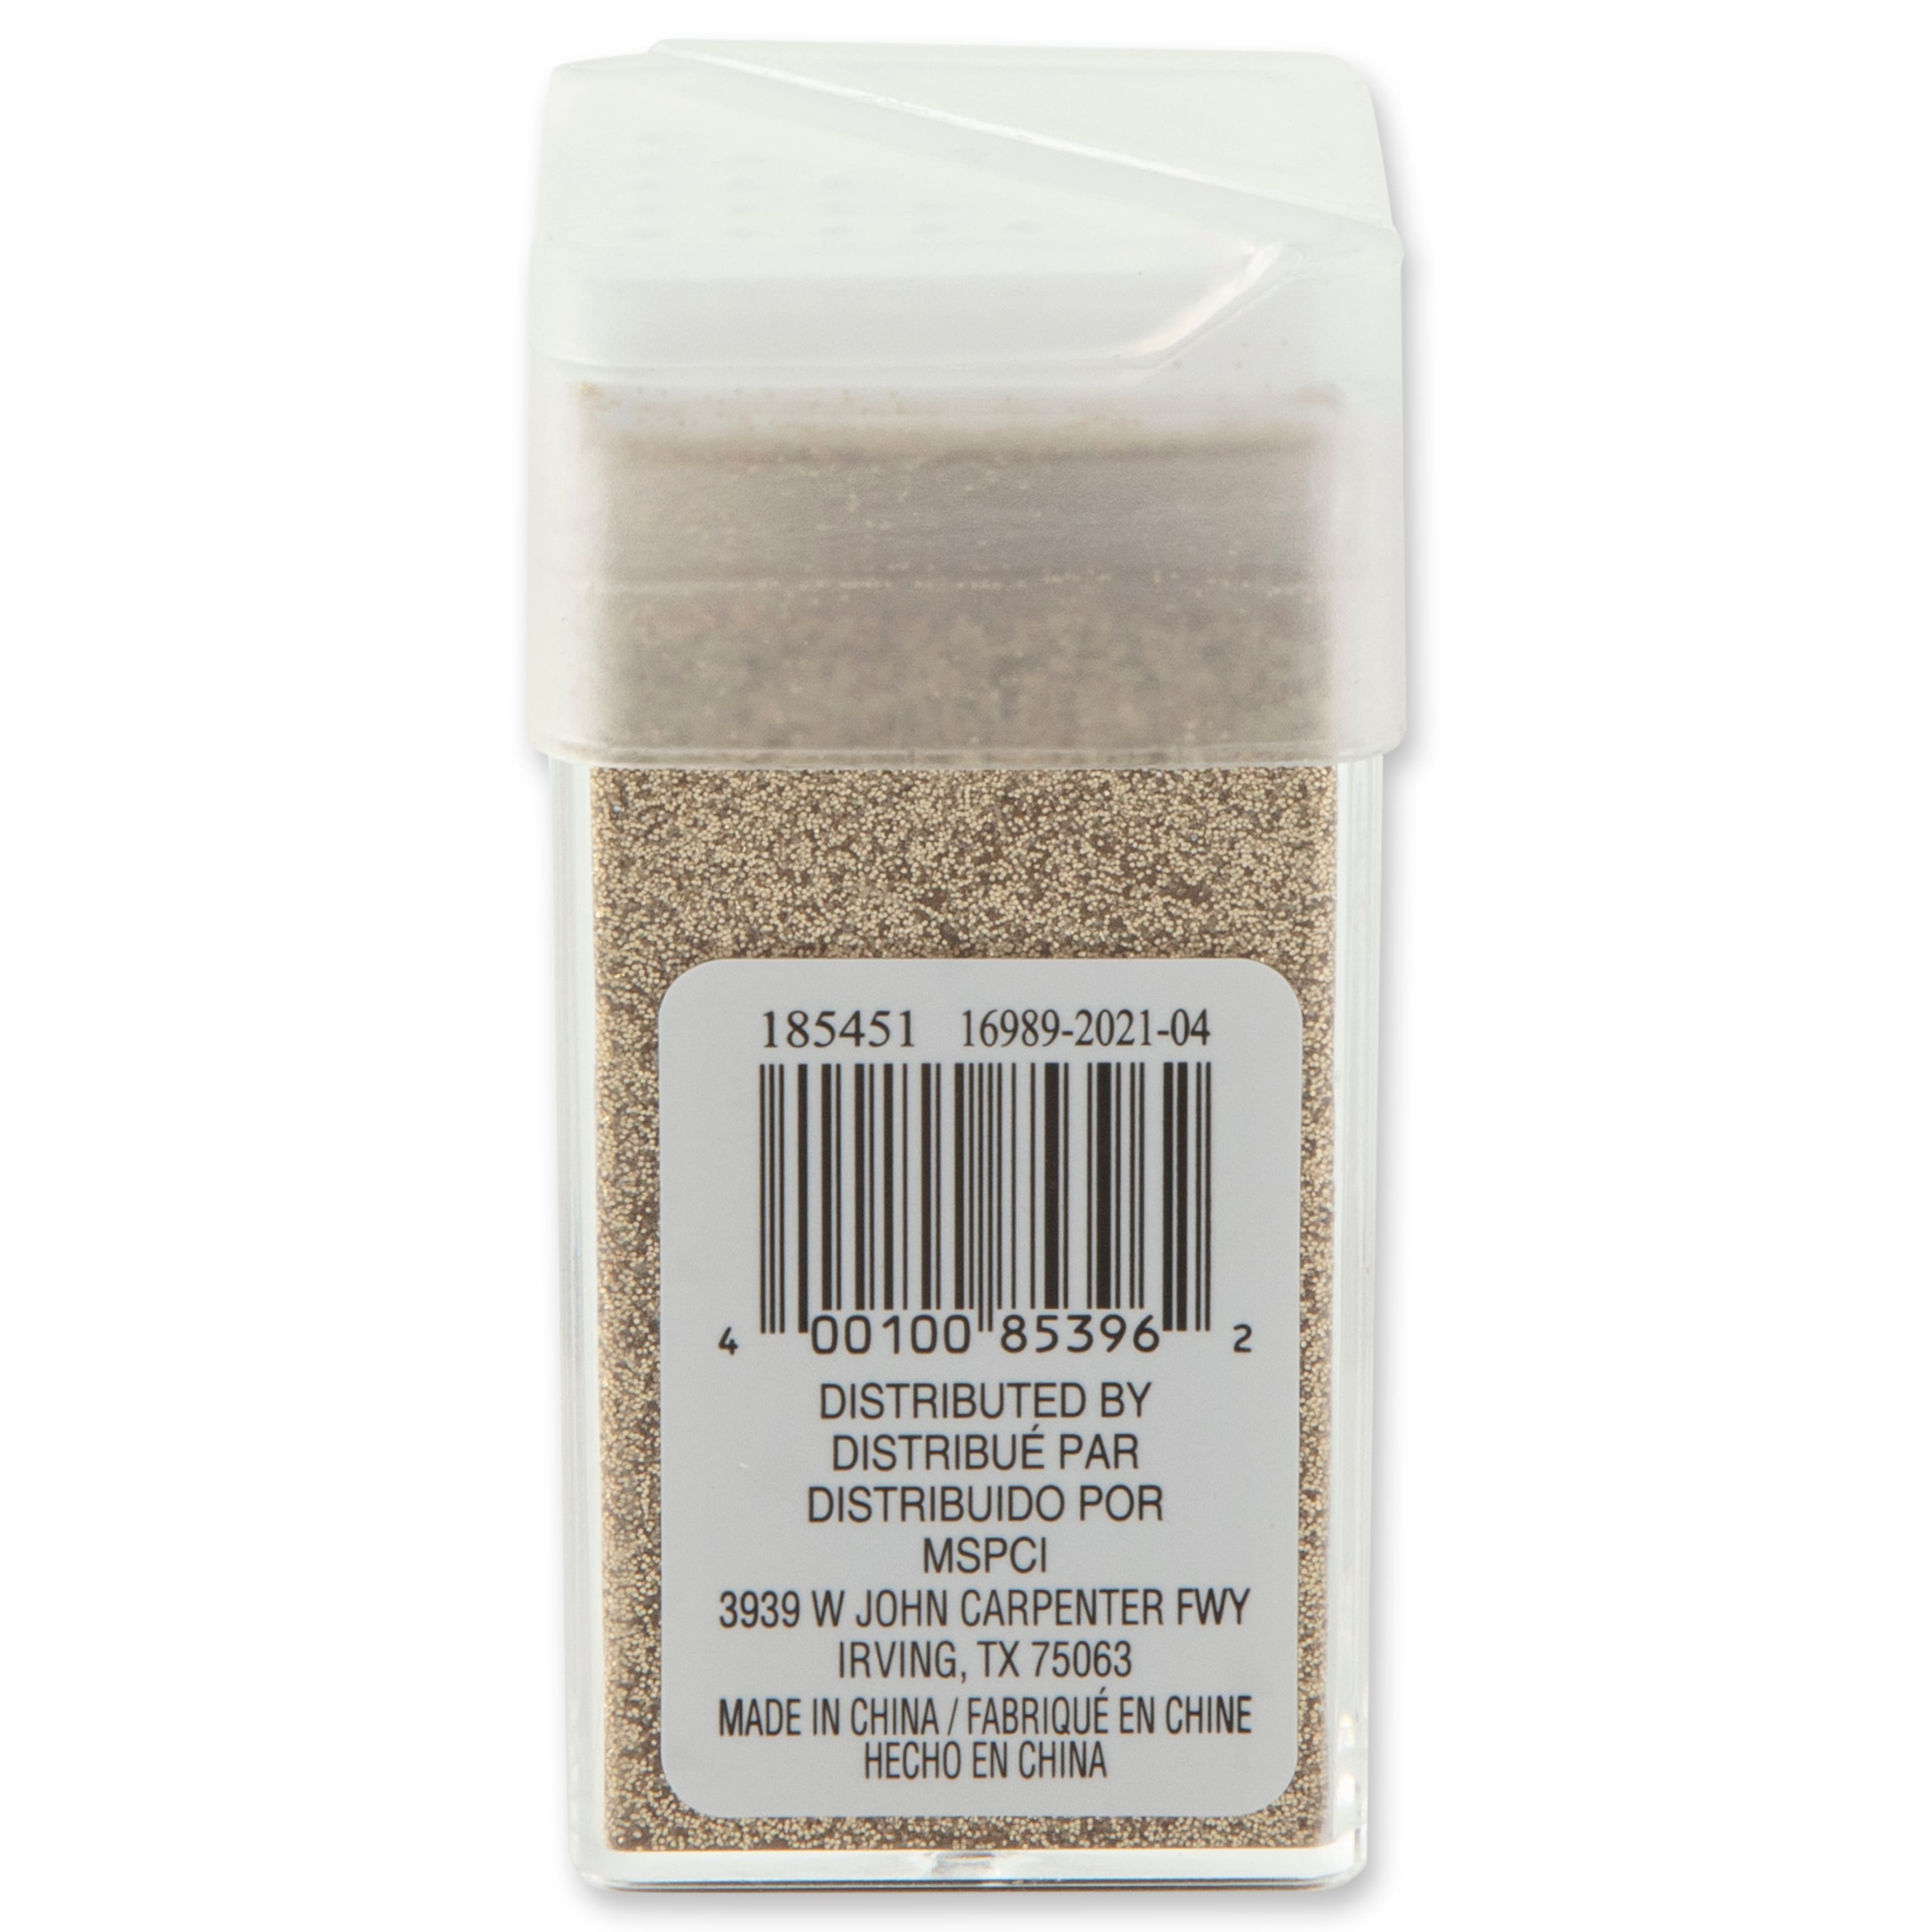 Extra Fine Glitter by Recollections&#x2122;, 1.5oz.